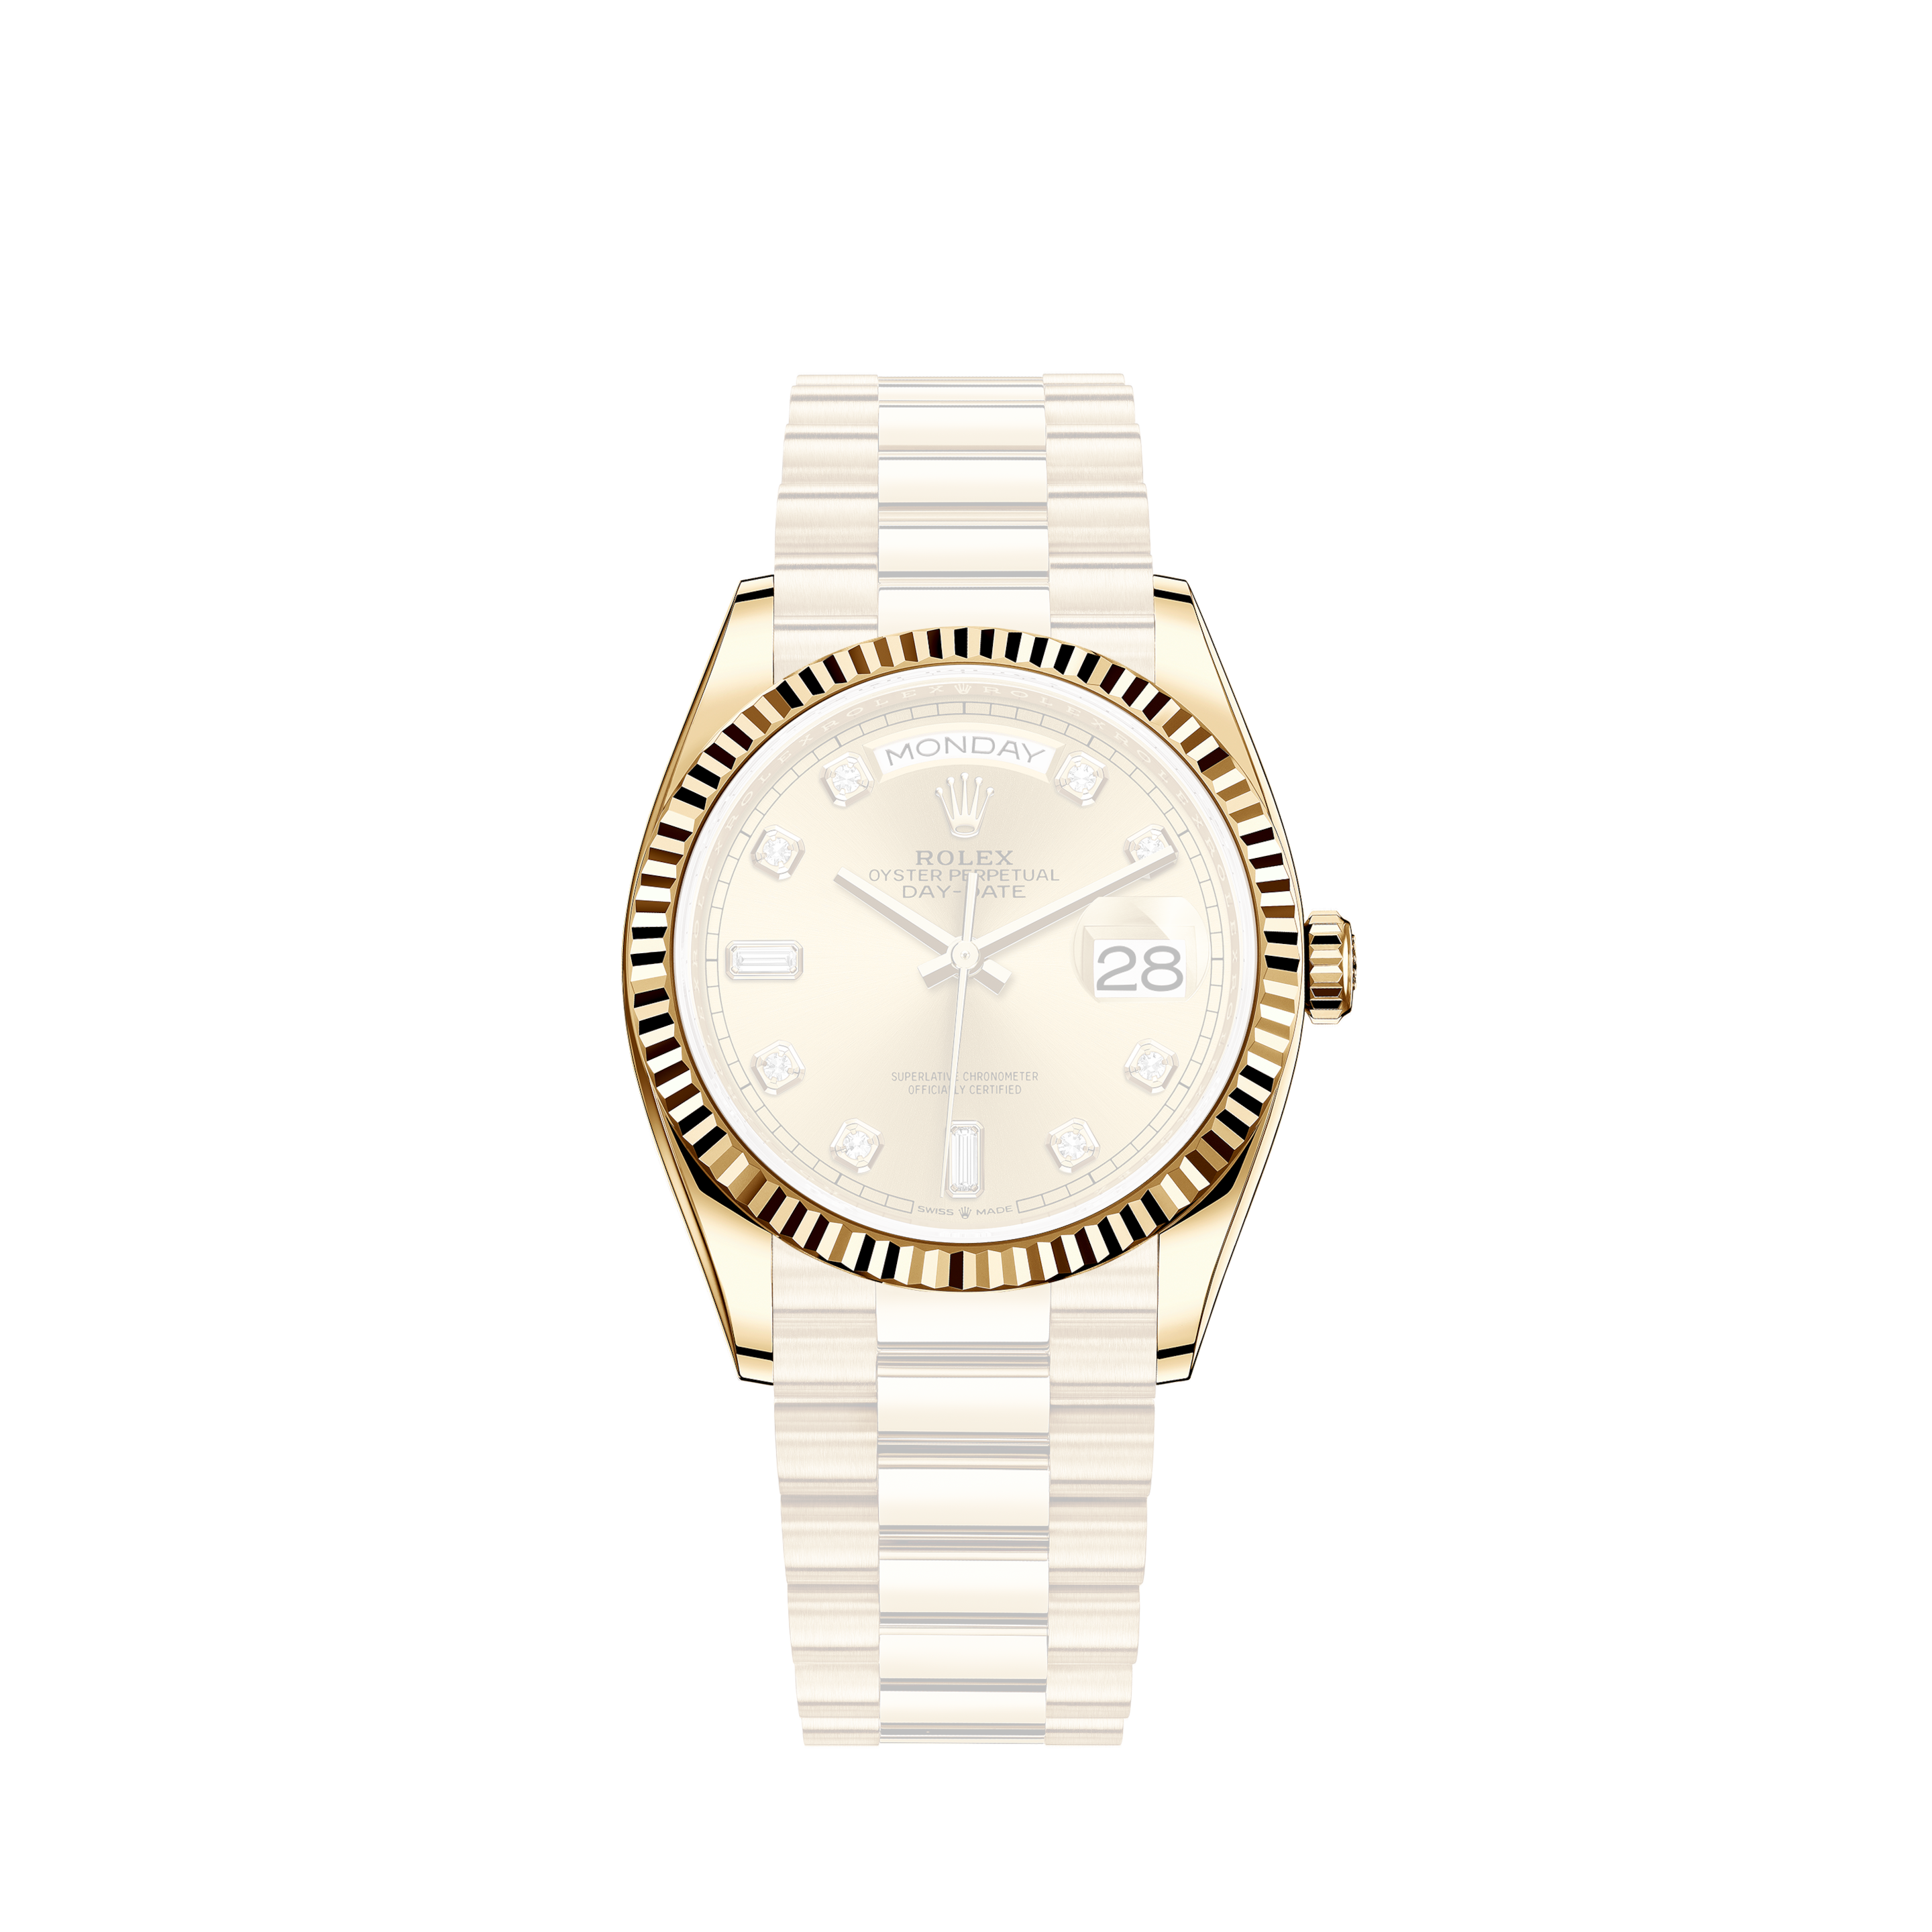 Rolex Women's Datejust Midsize Two Tone Fluted Custom Black Diamond DialRolex Women's Datejust Midsize Two Tone Fluted Custom Blue Diamond Dial